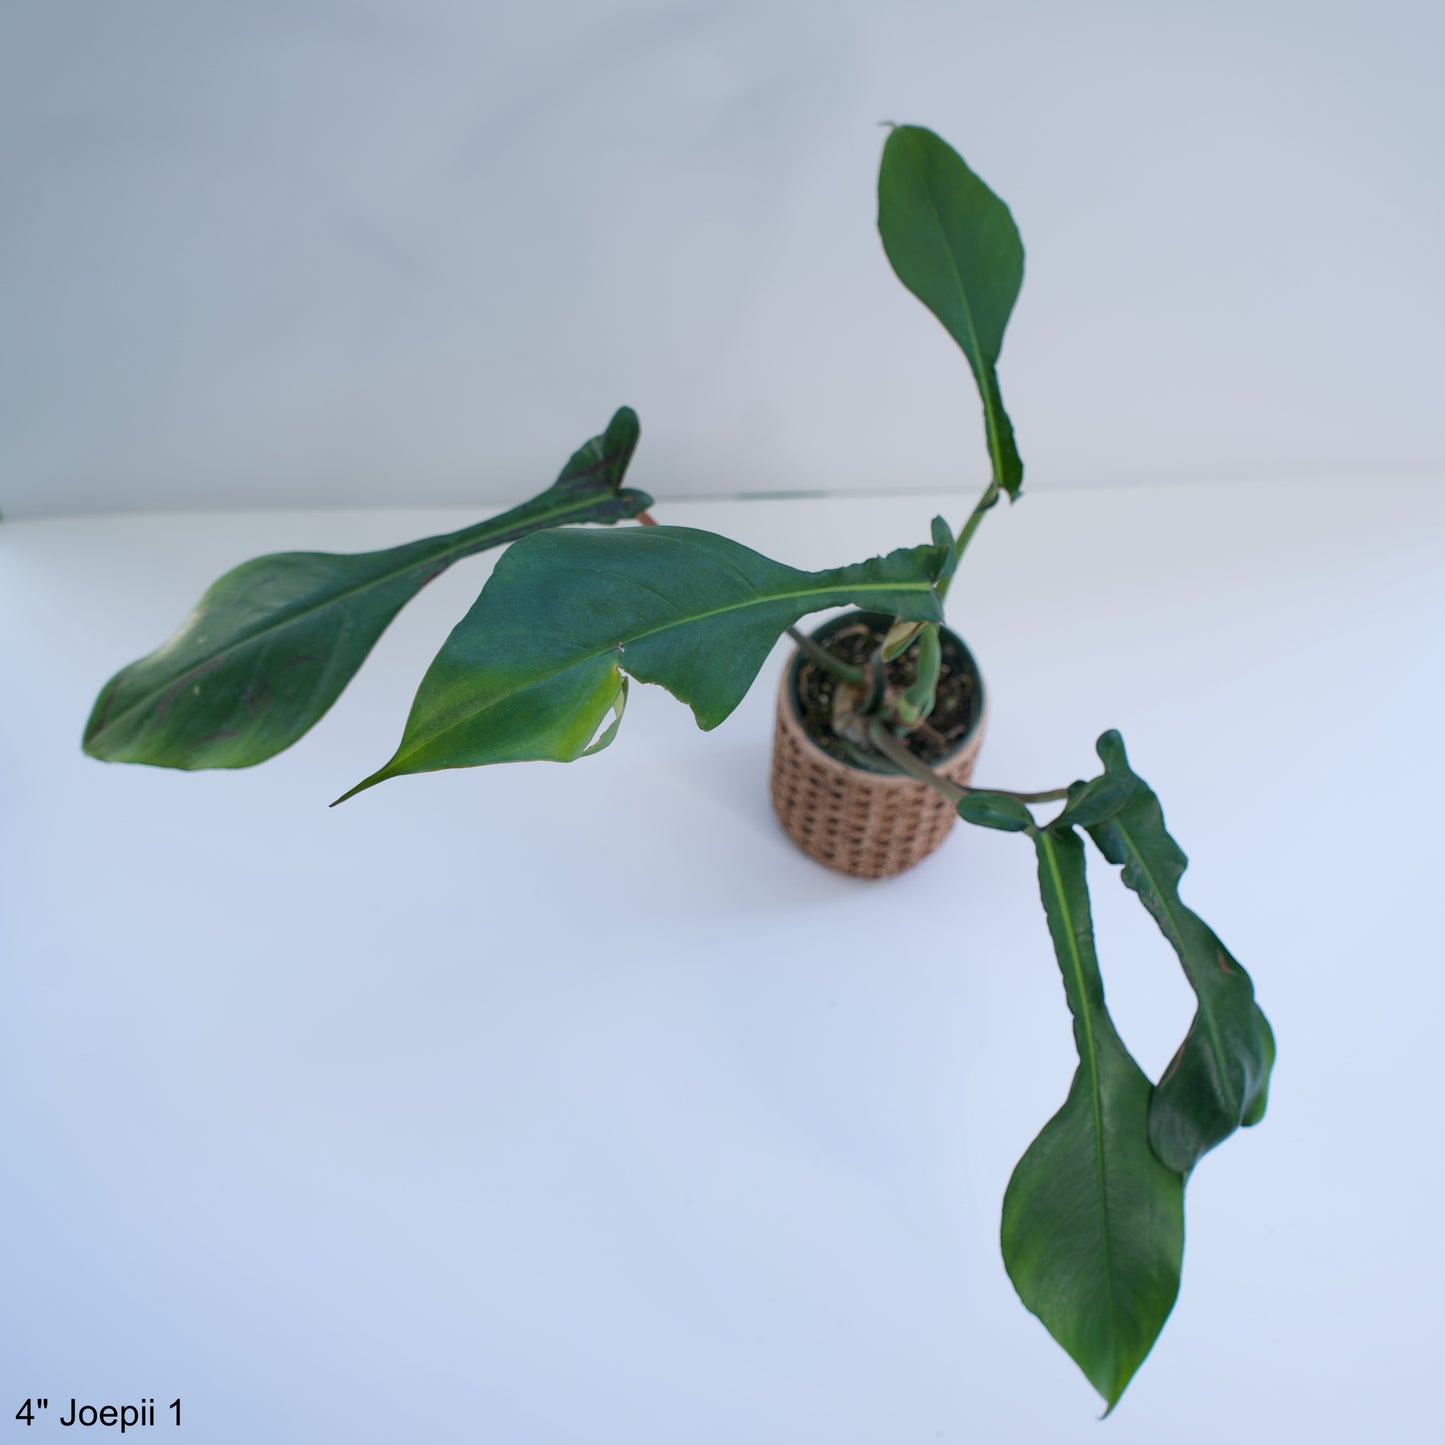 4" Philodendron Joepii